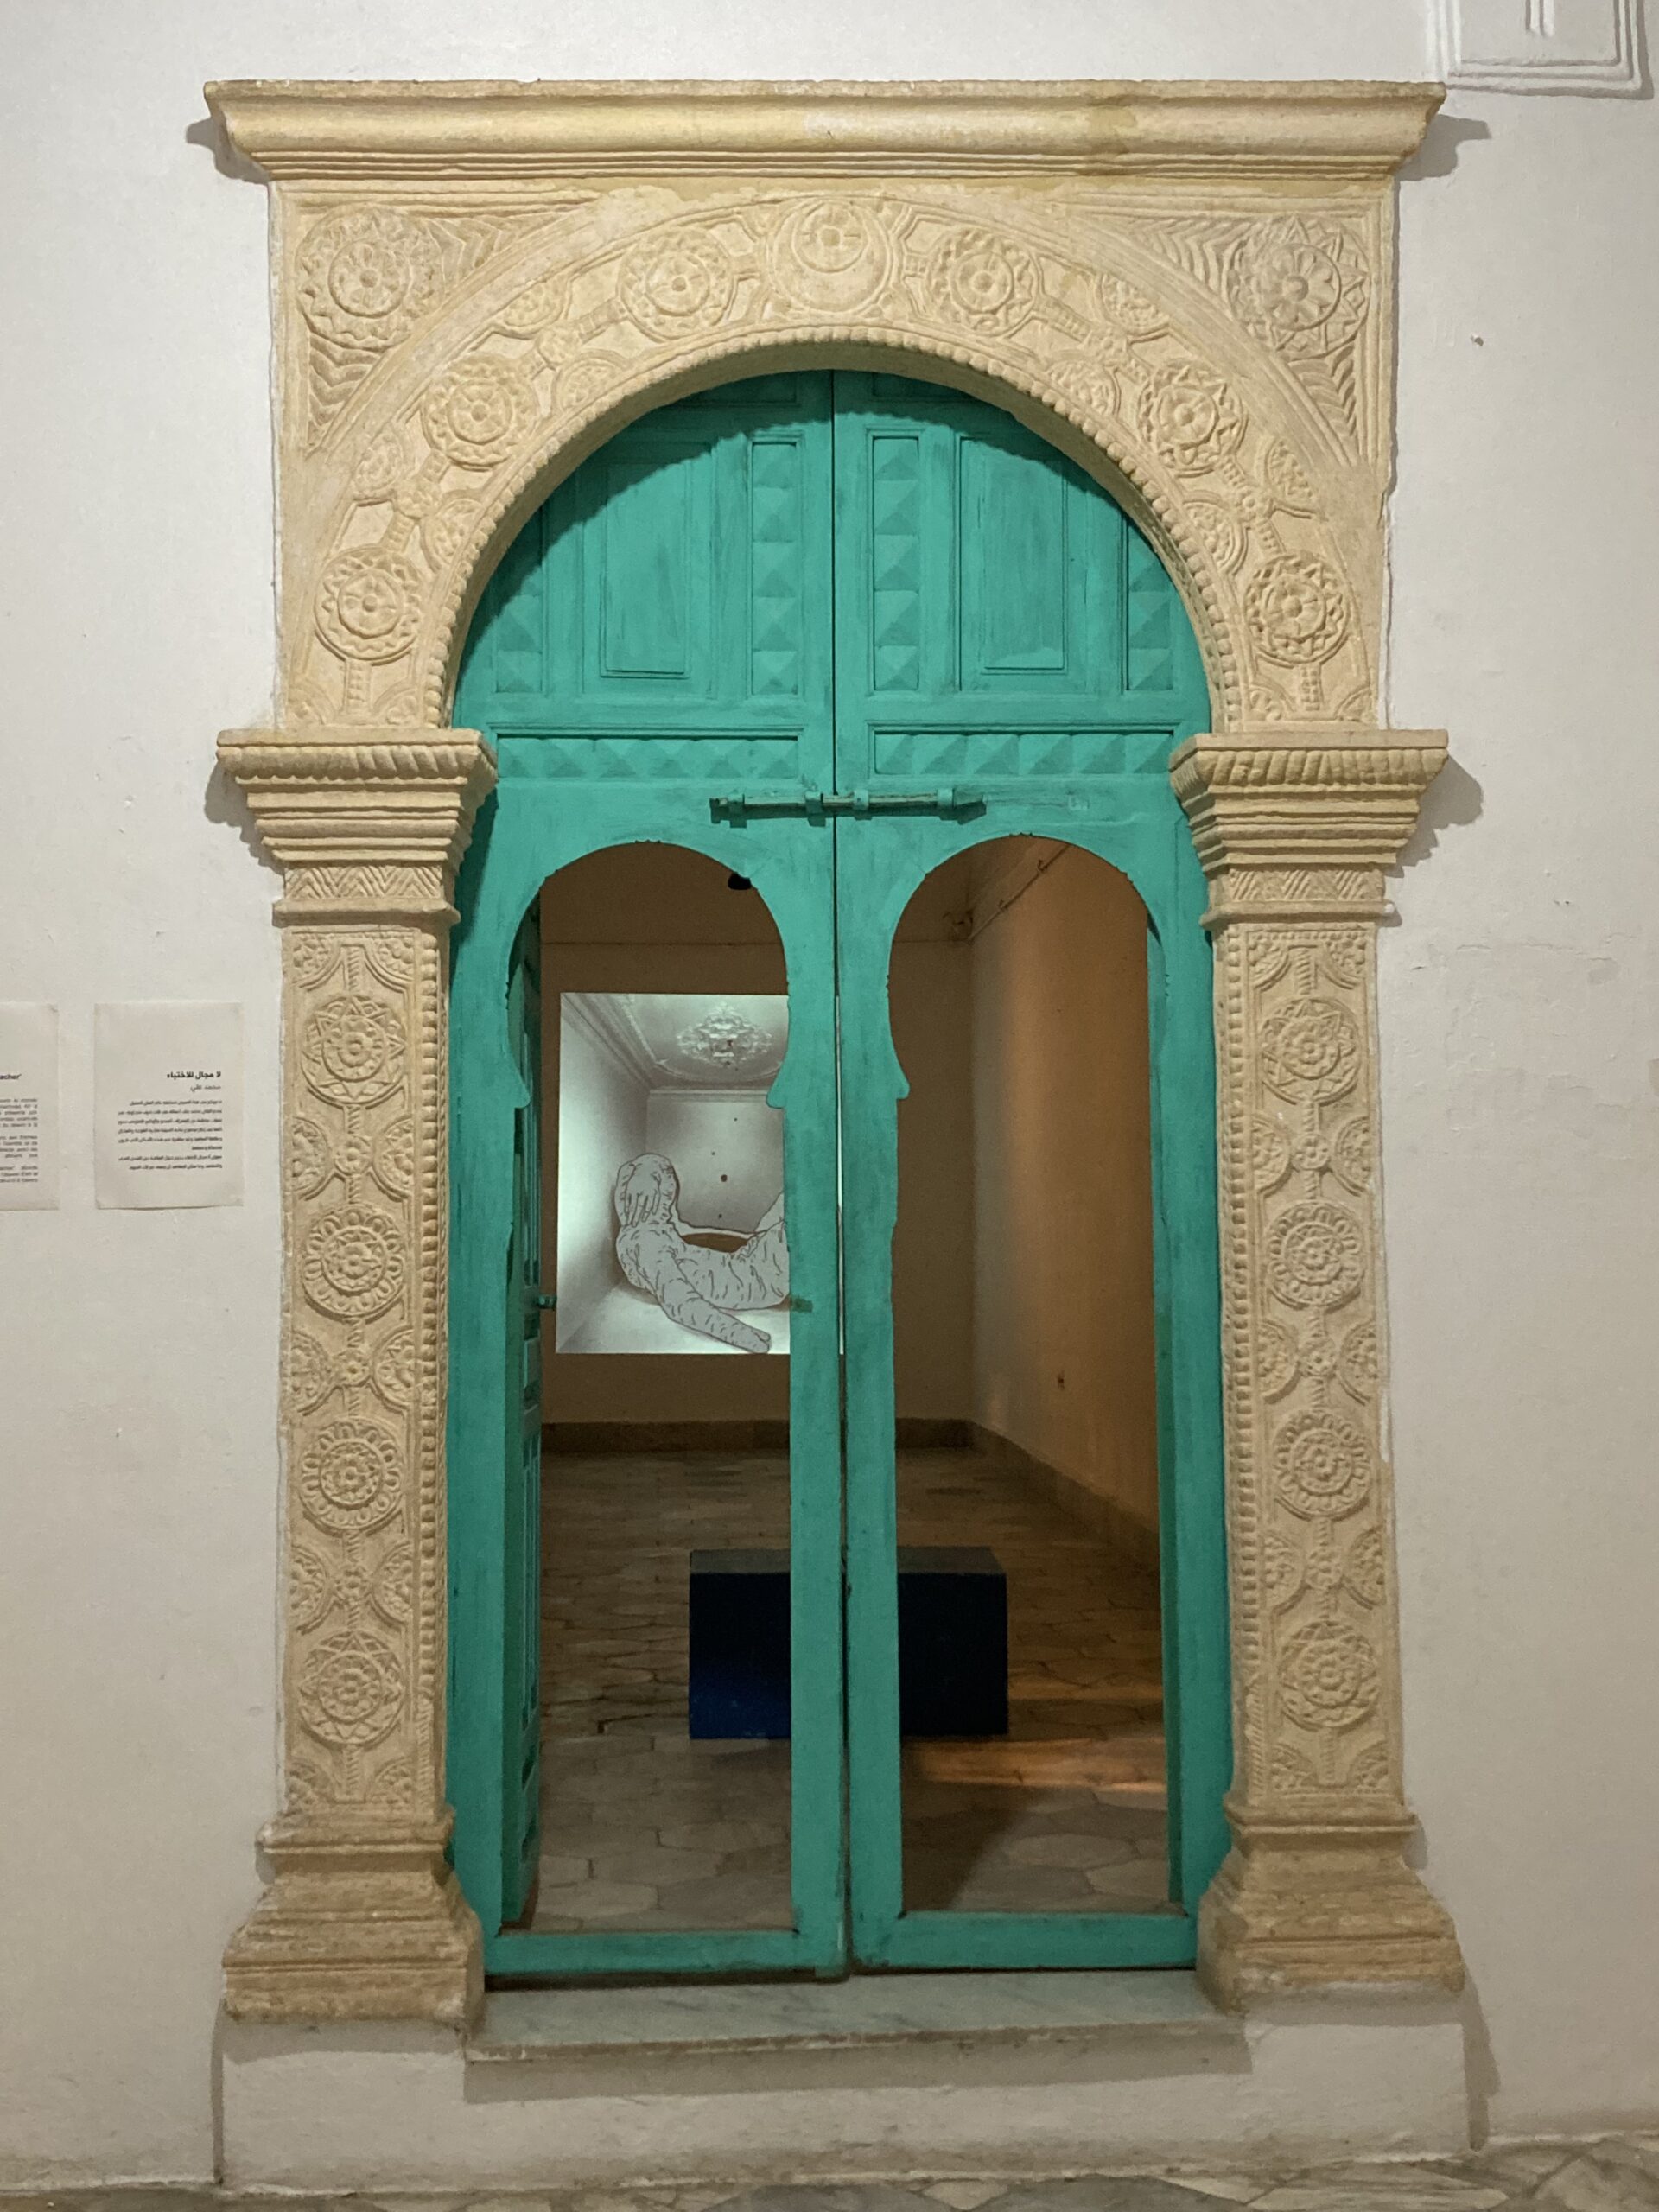 Image of a off-white carved archway in front of a teal blue double door, behind which is a room with a projected screen on the wall.